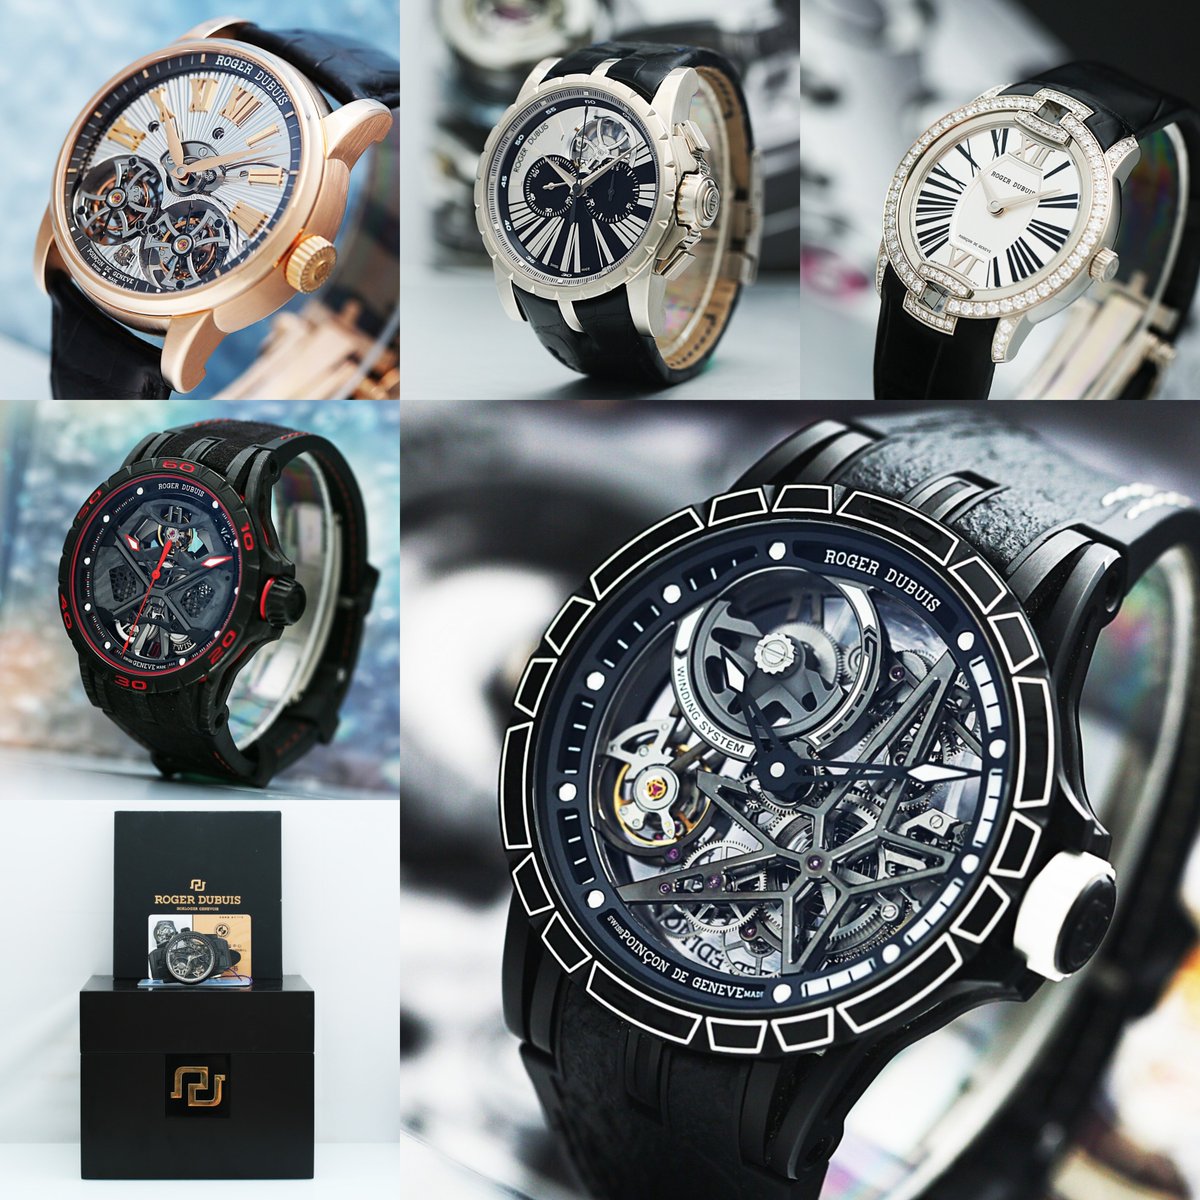 Check our Roger Dubuis here😍
roxiebnwatches.com/high-end-roger…
Free shipping! And the Price is negotiable~ #watch #watchforsale #watchcollector #rogerdubuis #rogerdubuiswatches #excalibur #menstyle #mensfashion #rolex